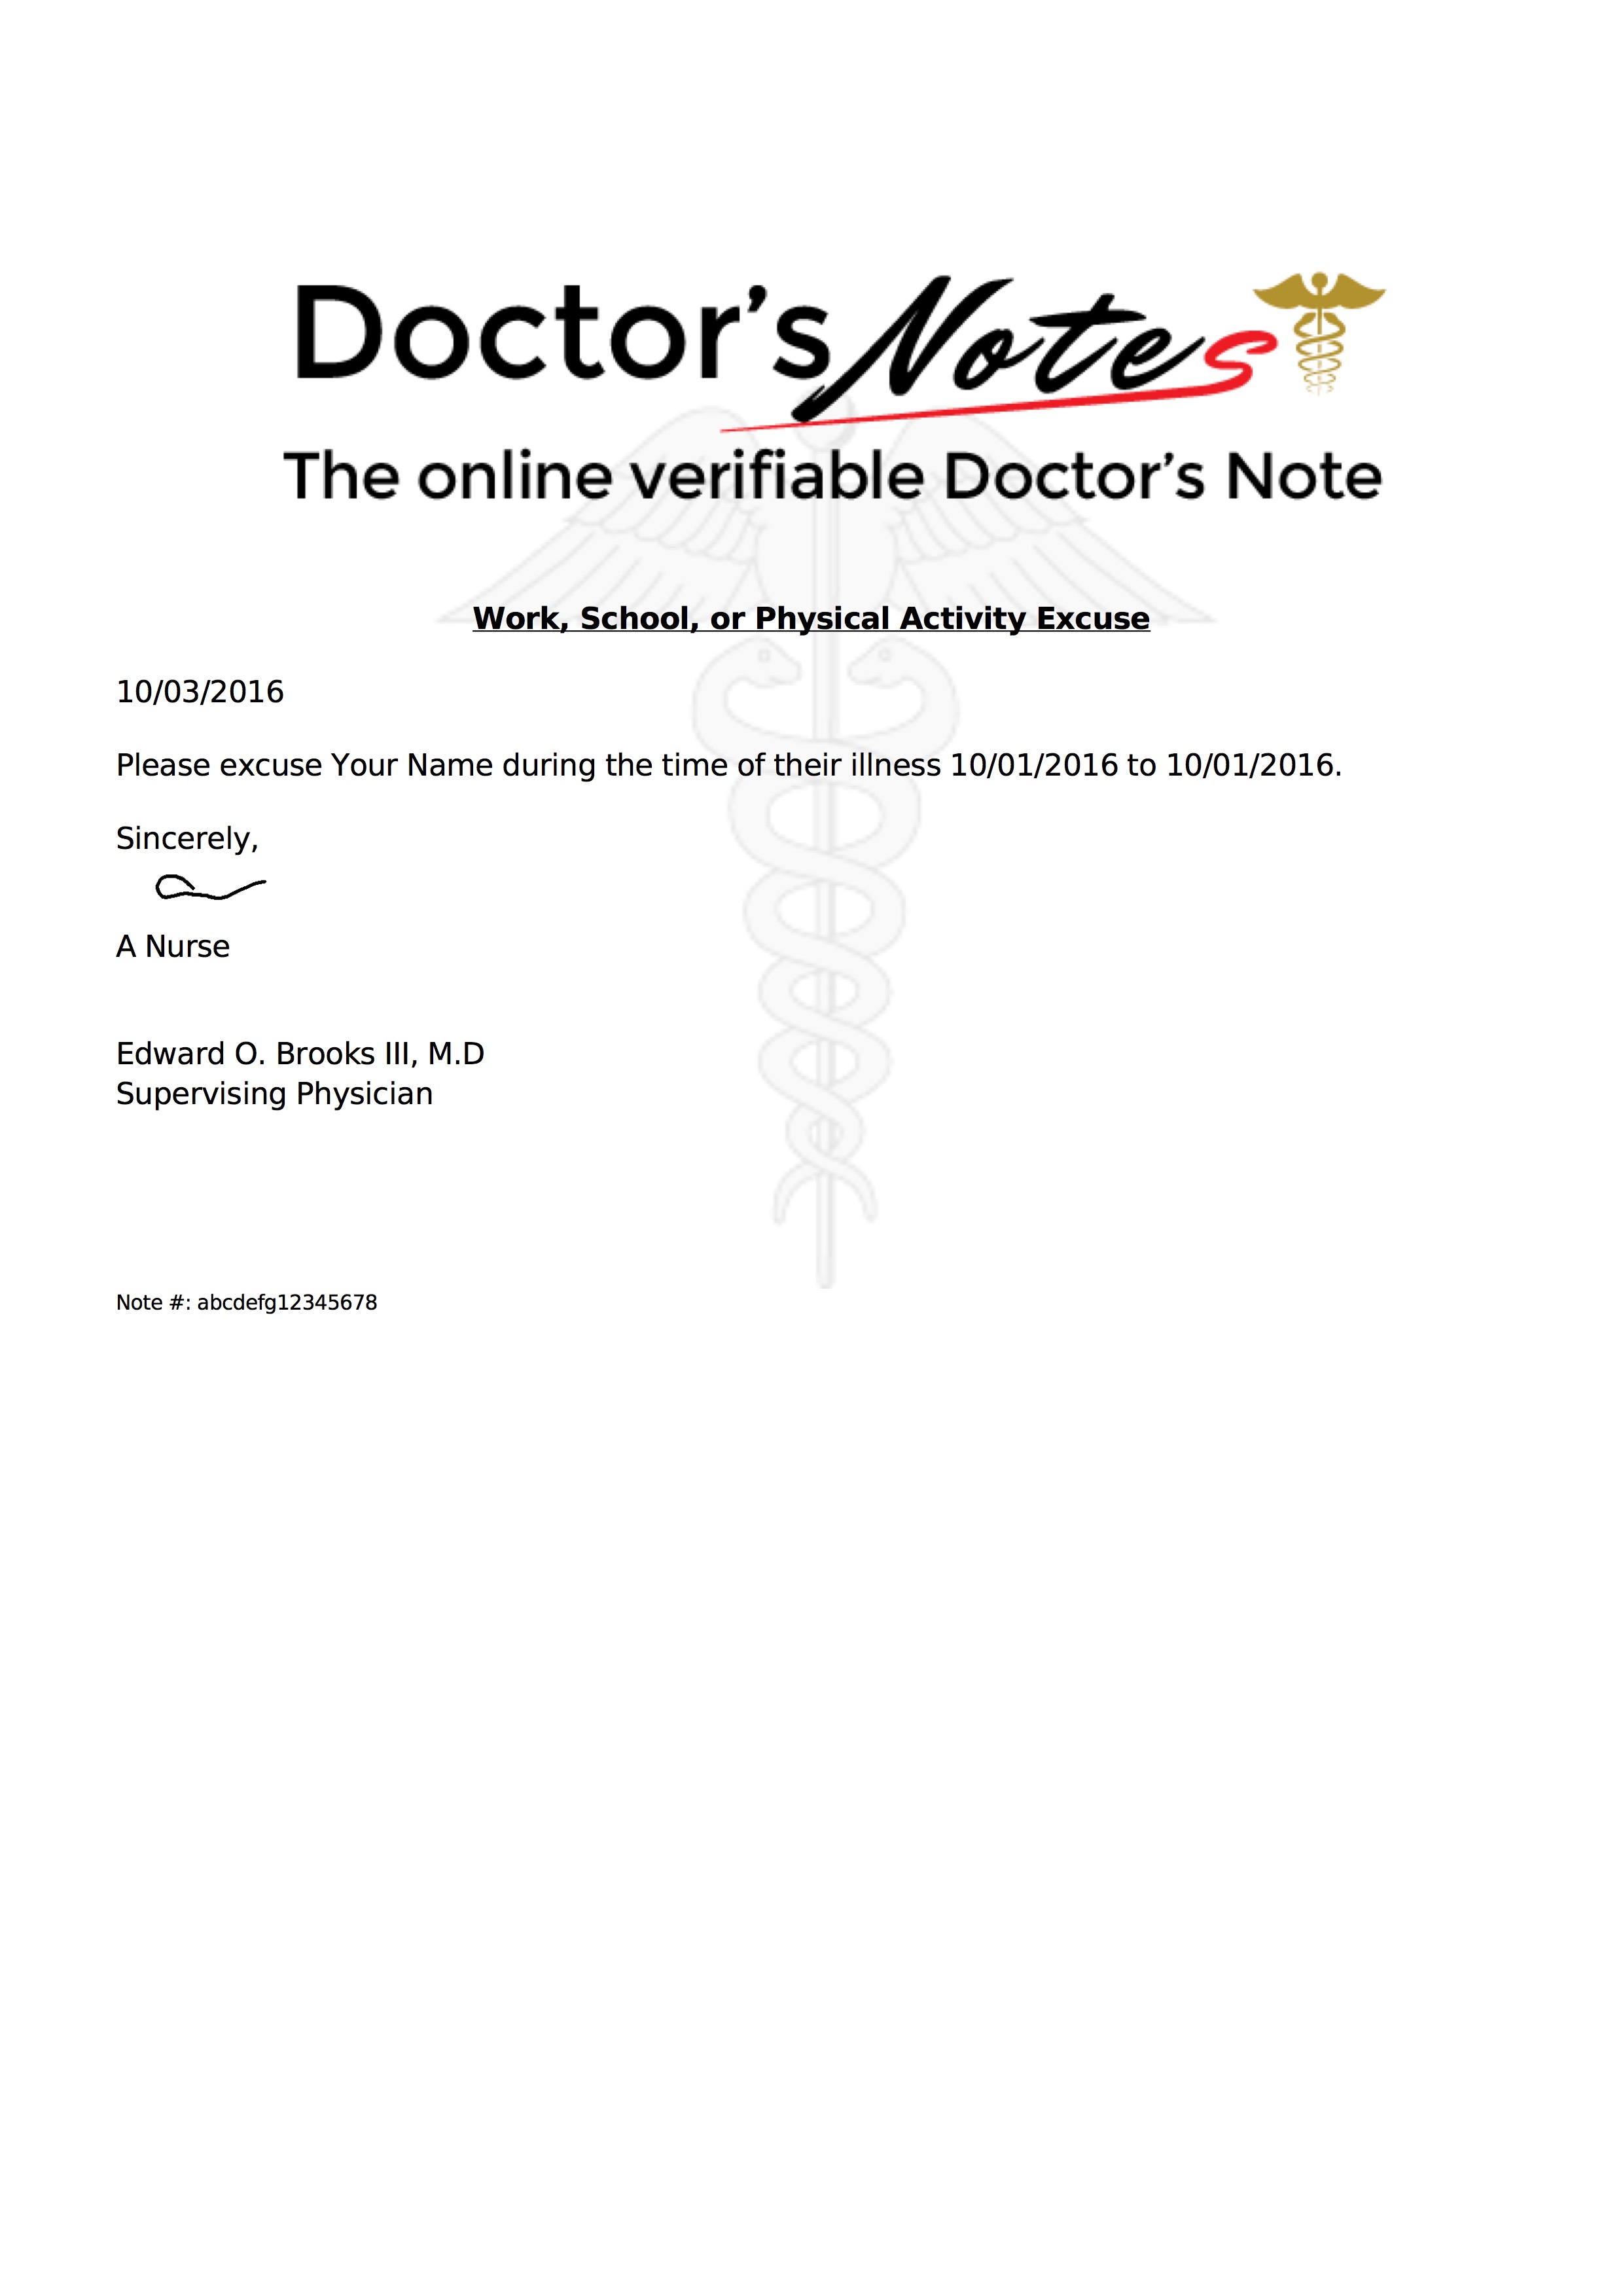 An example doctorsnote